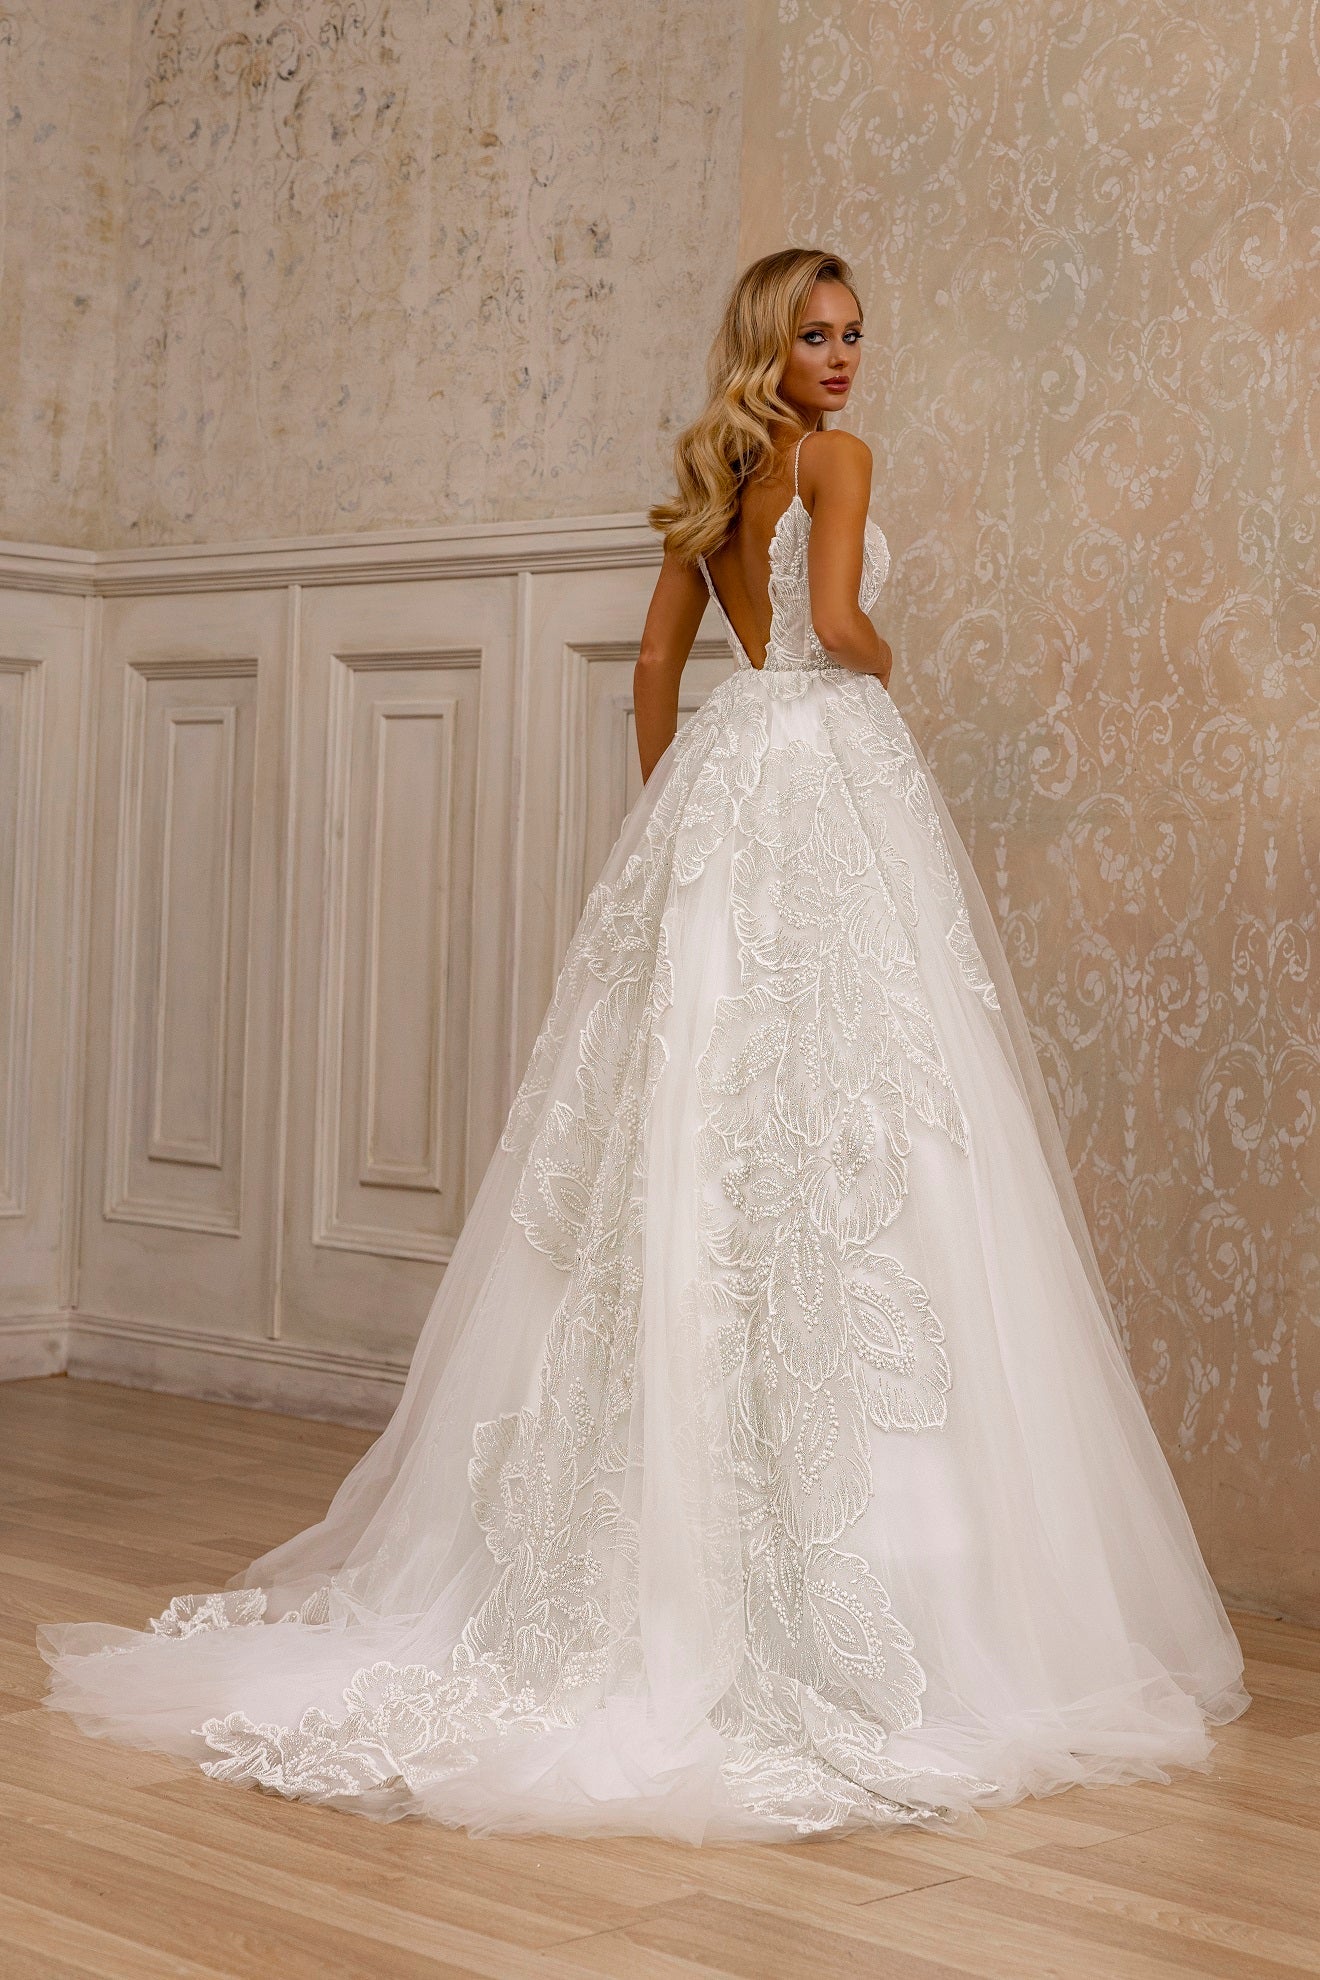 Elegant Floral A-Line Bridal Gown with Lace Detailing and Flattering Silhouette - WonderlandByLilian